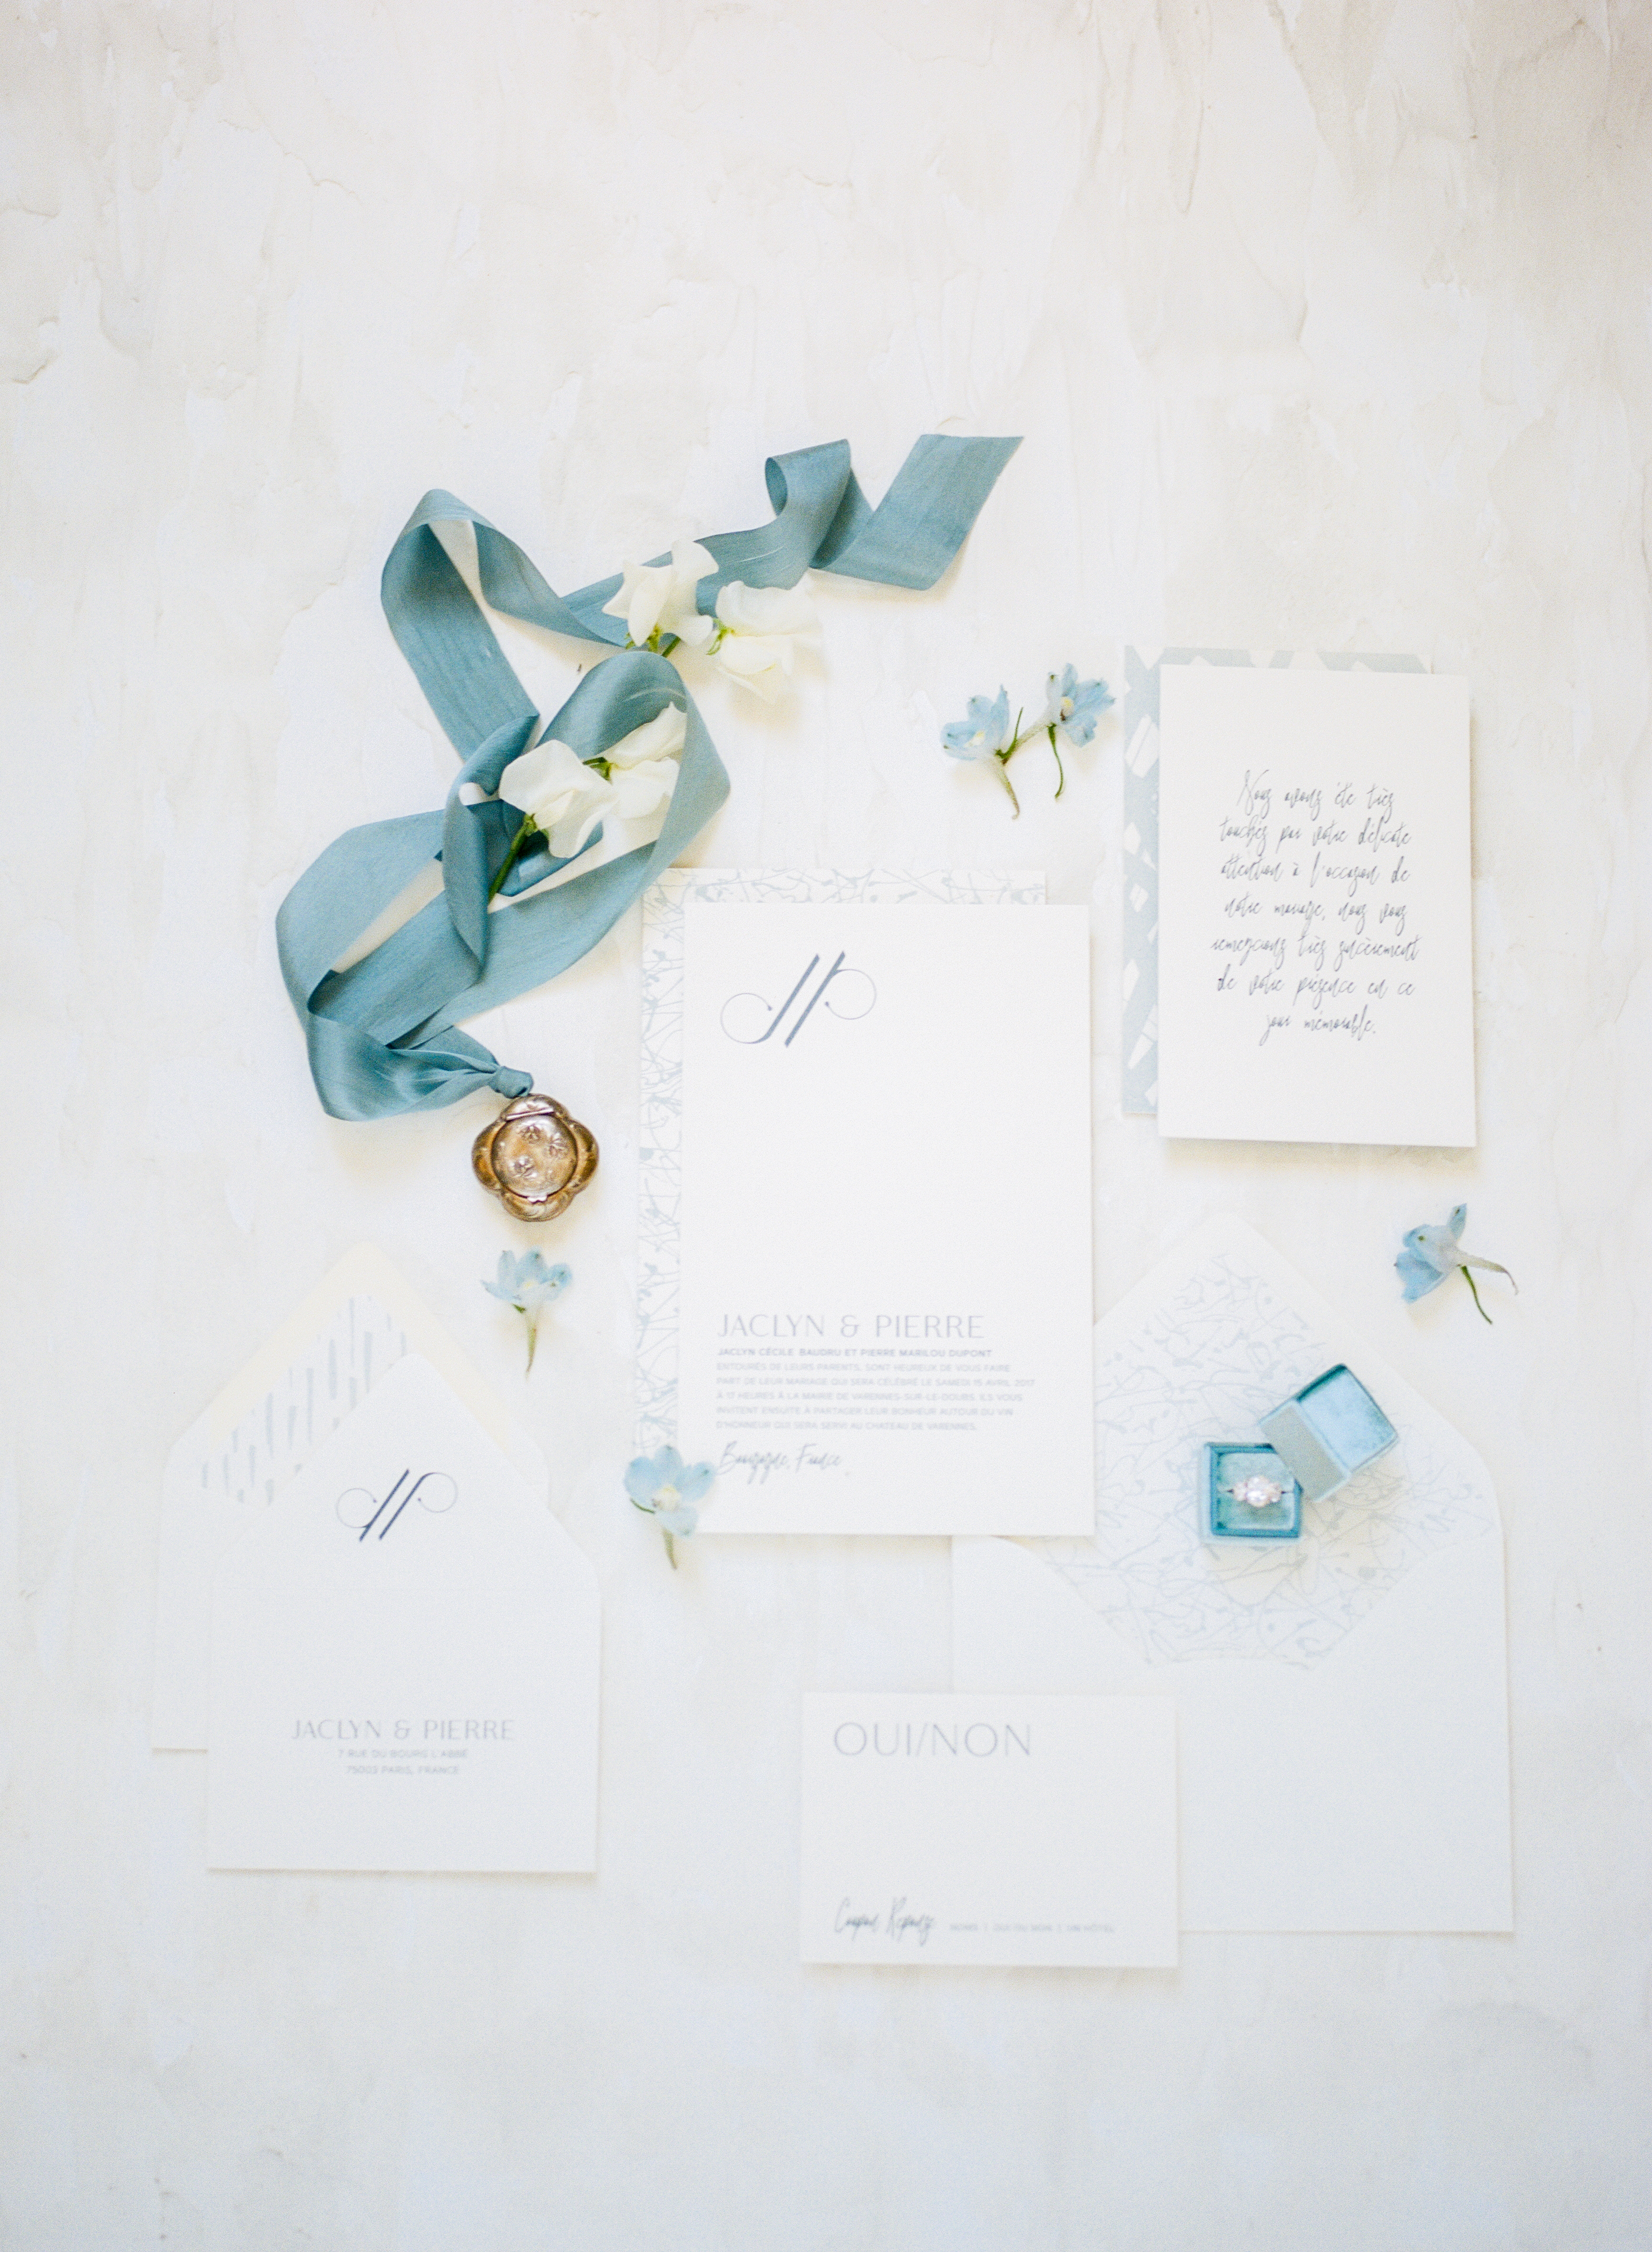 How to send gorgeous wedding invitations without breaking the bank